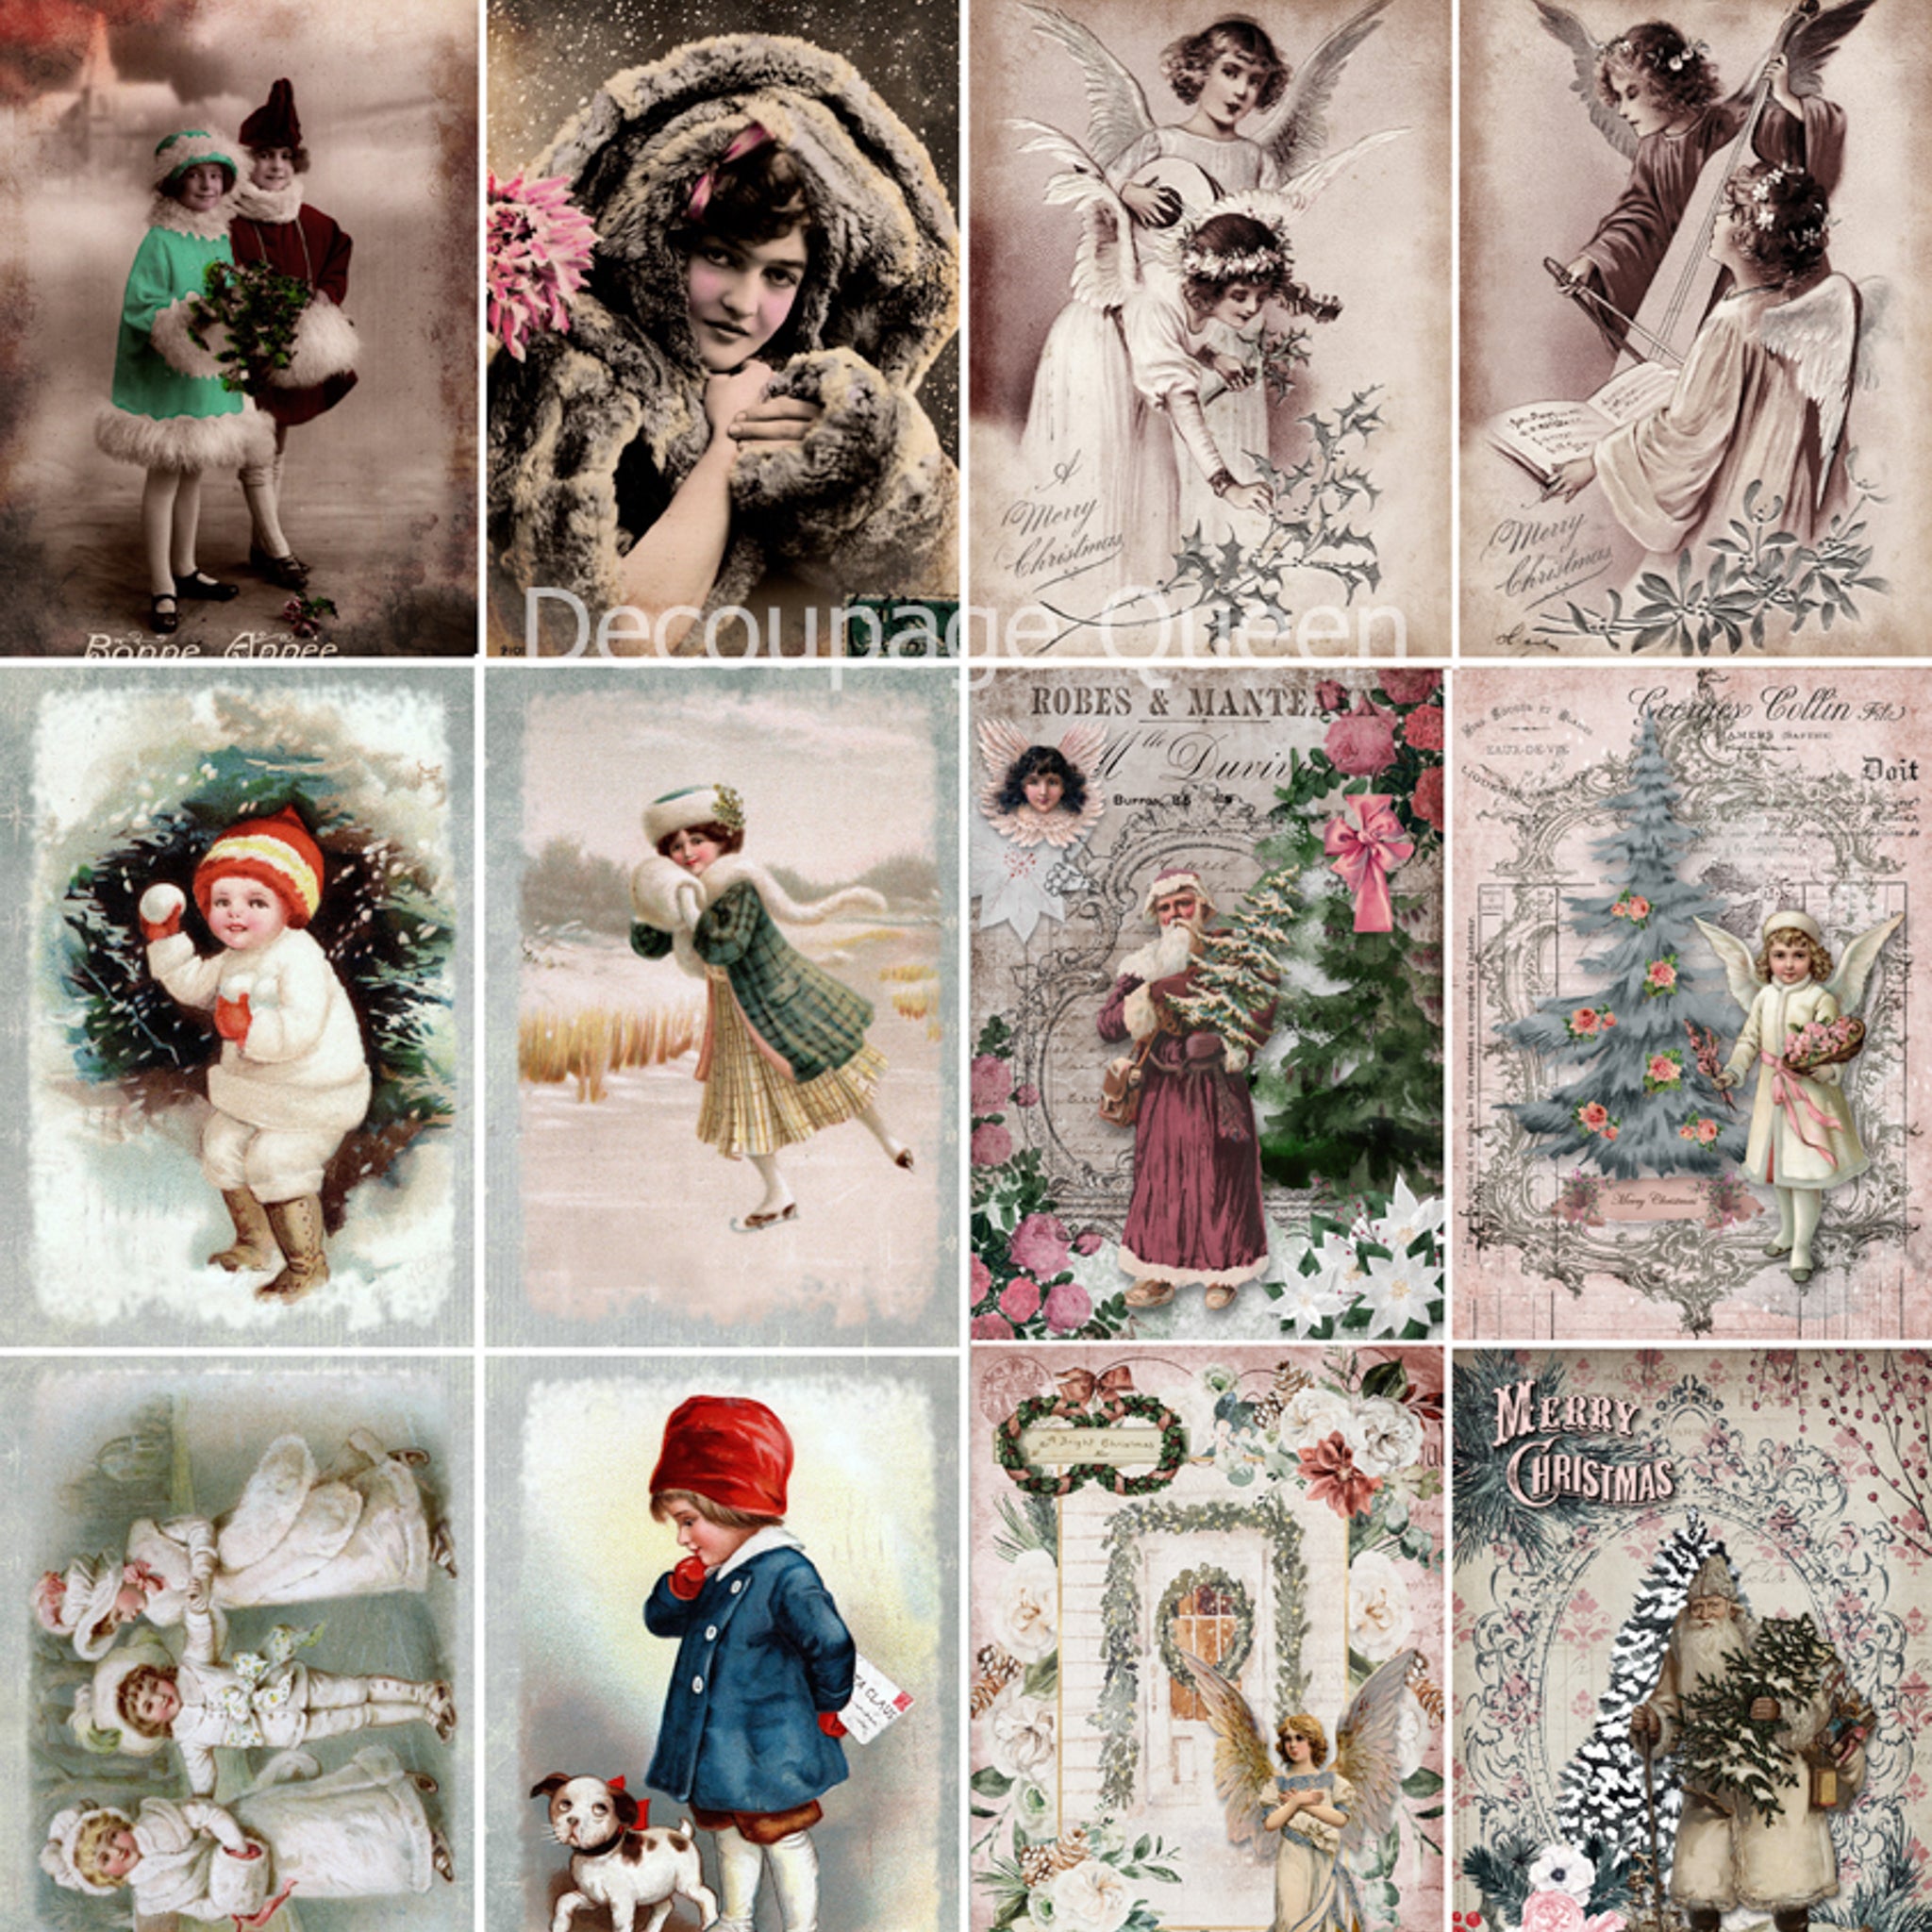 A3 rice paper designs featuring vintage scenes of children and women in winter clothes, Santas, and angels.